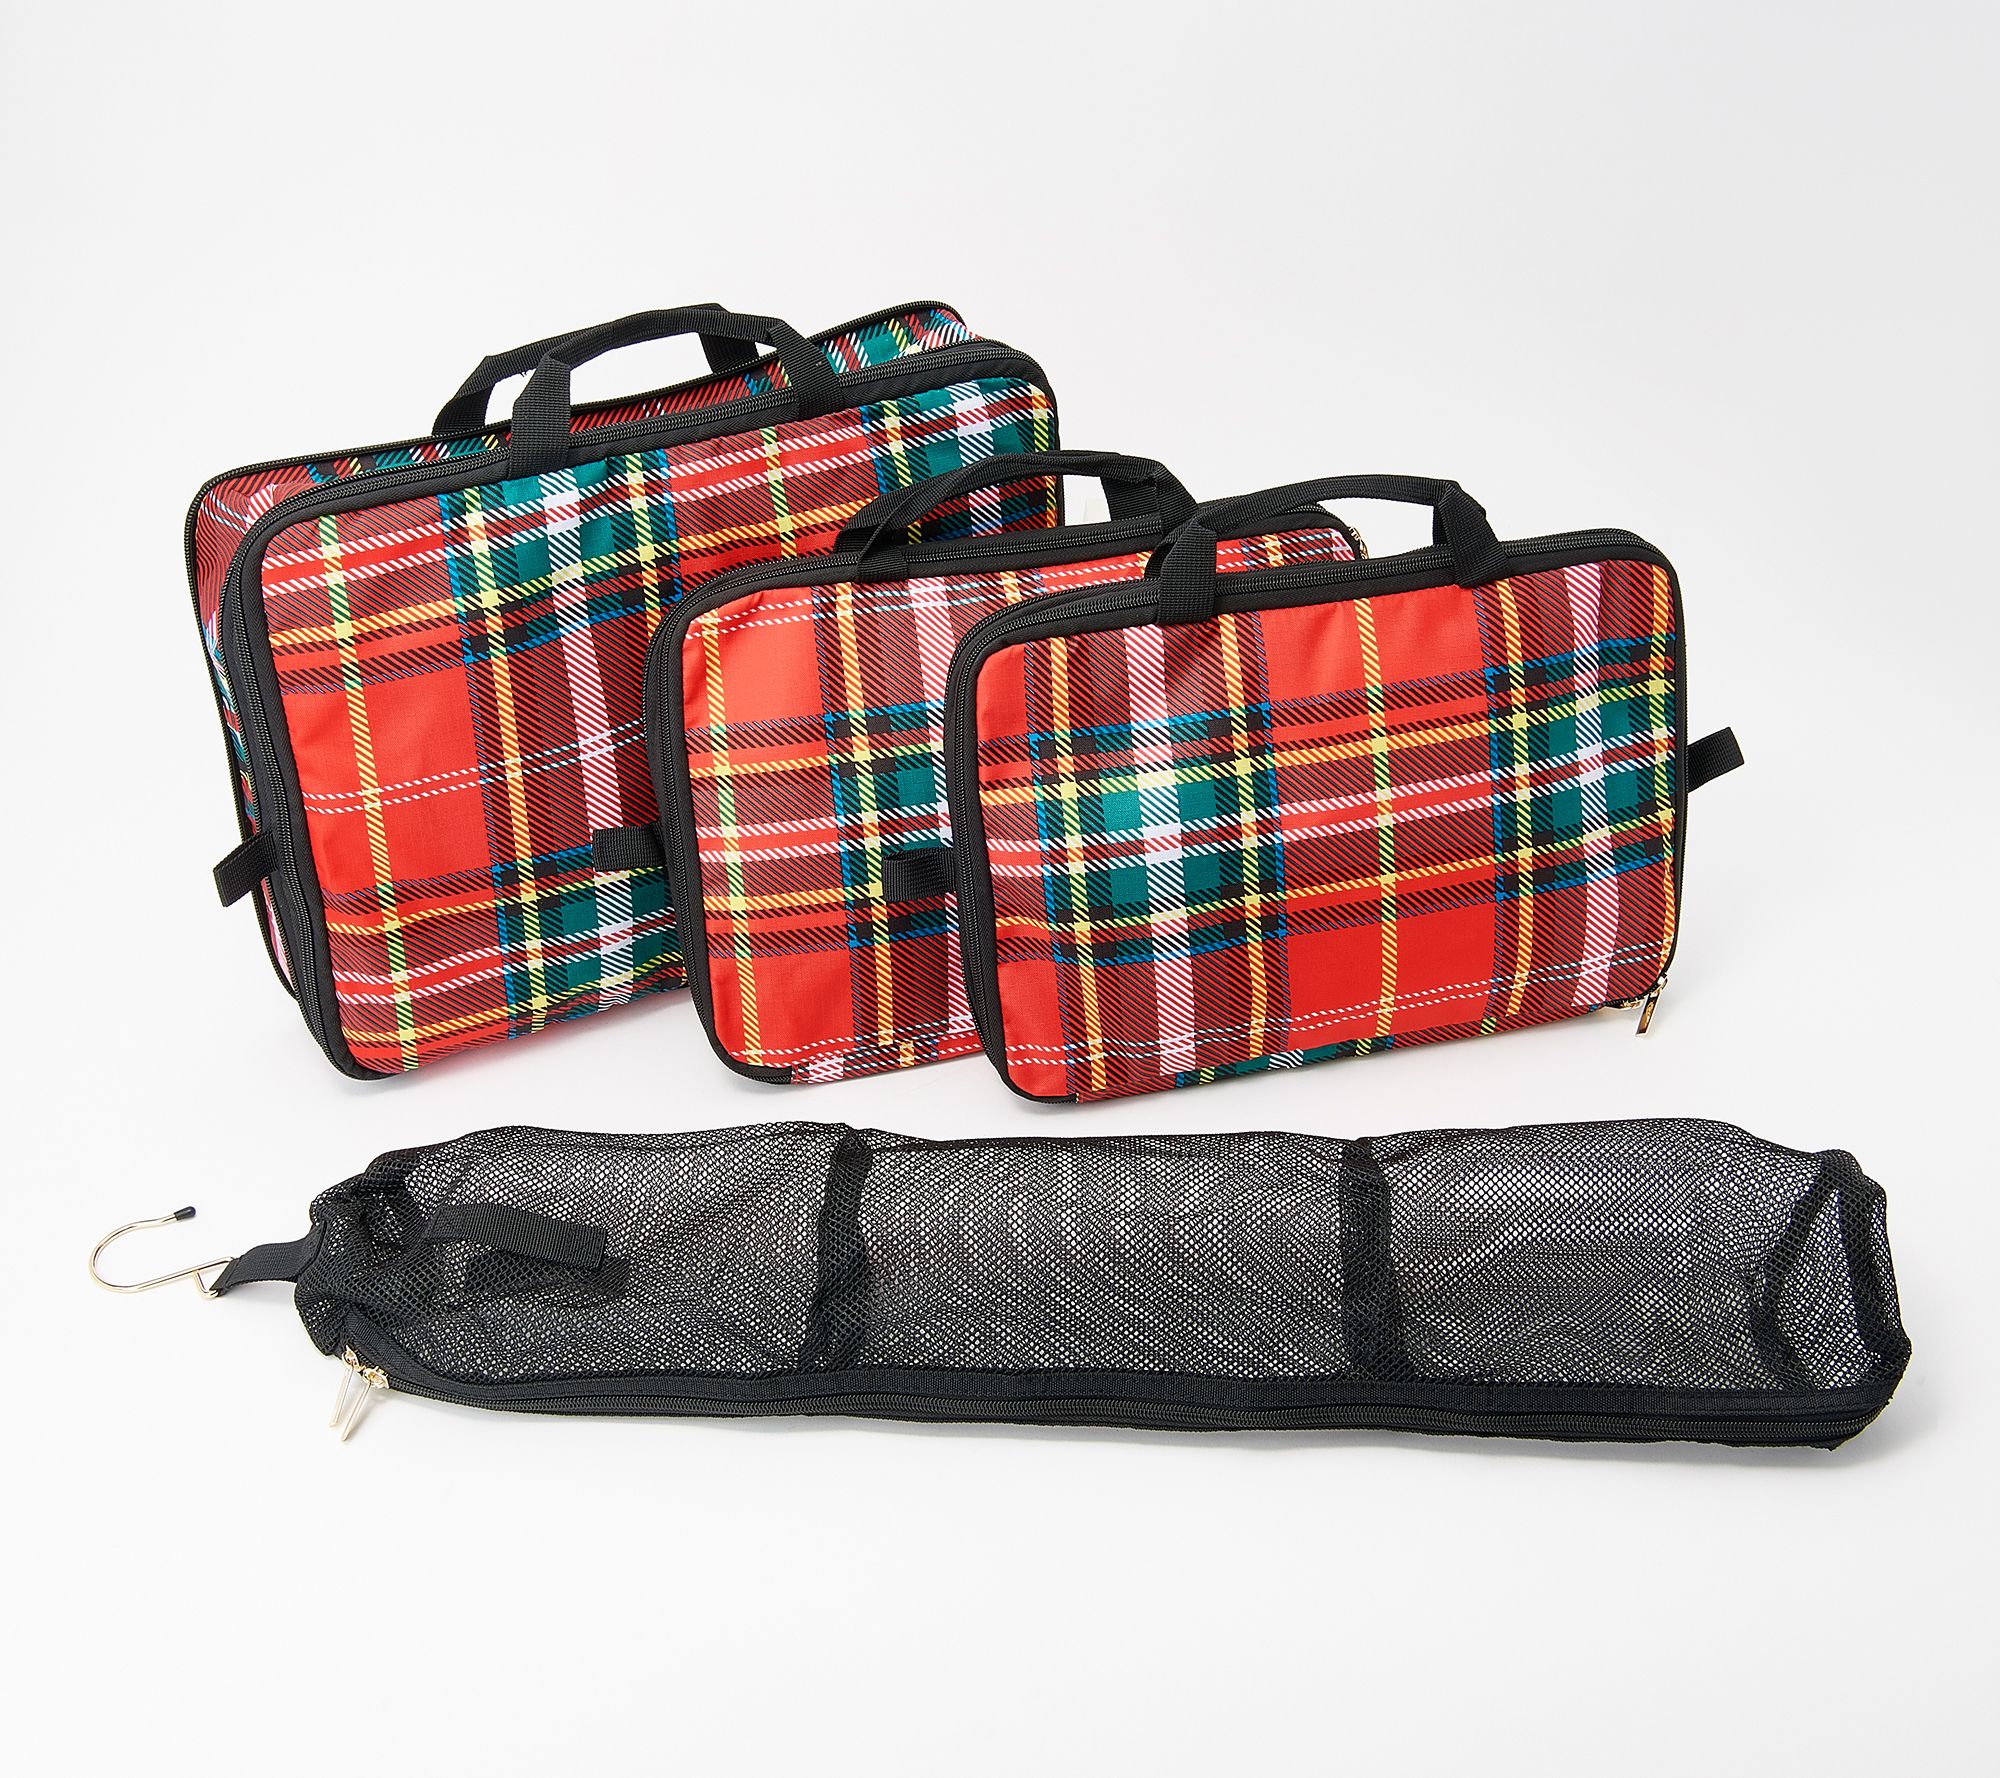  The Chestnut 8 Space Saver Bags, No Vacuum Needed, Roll-Up  Compression Packing, Travel Essentials, for Suitcases : Home & Kitchen